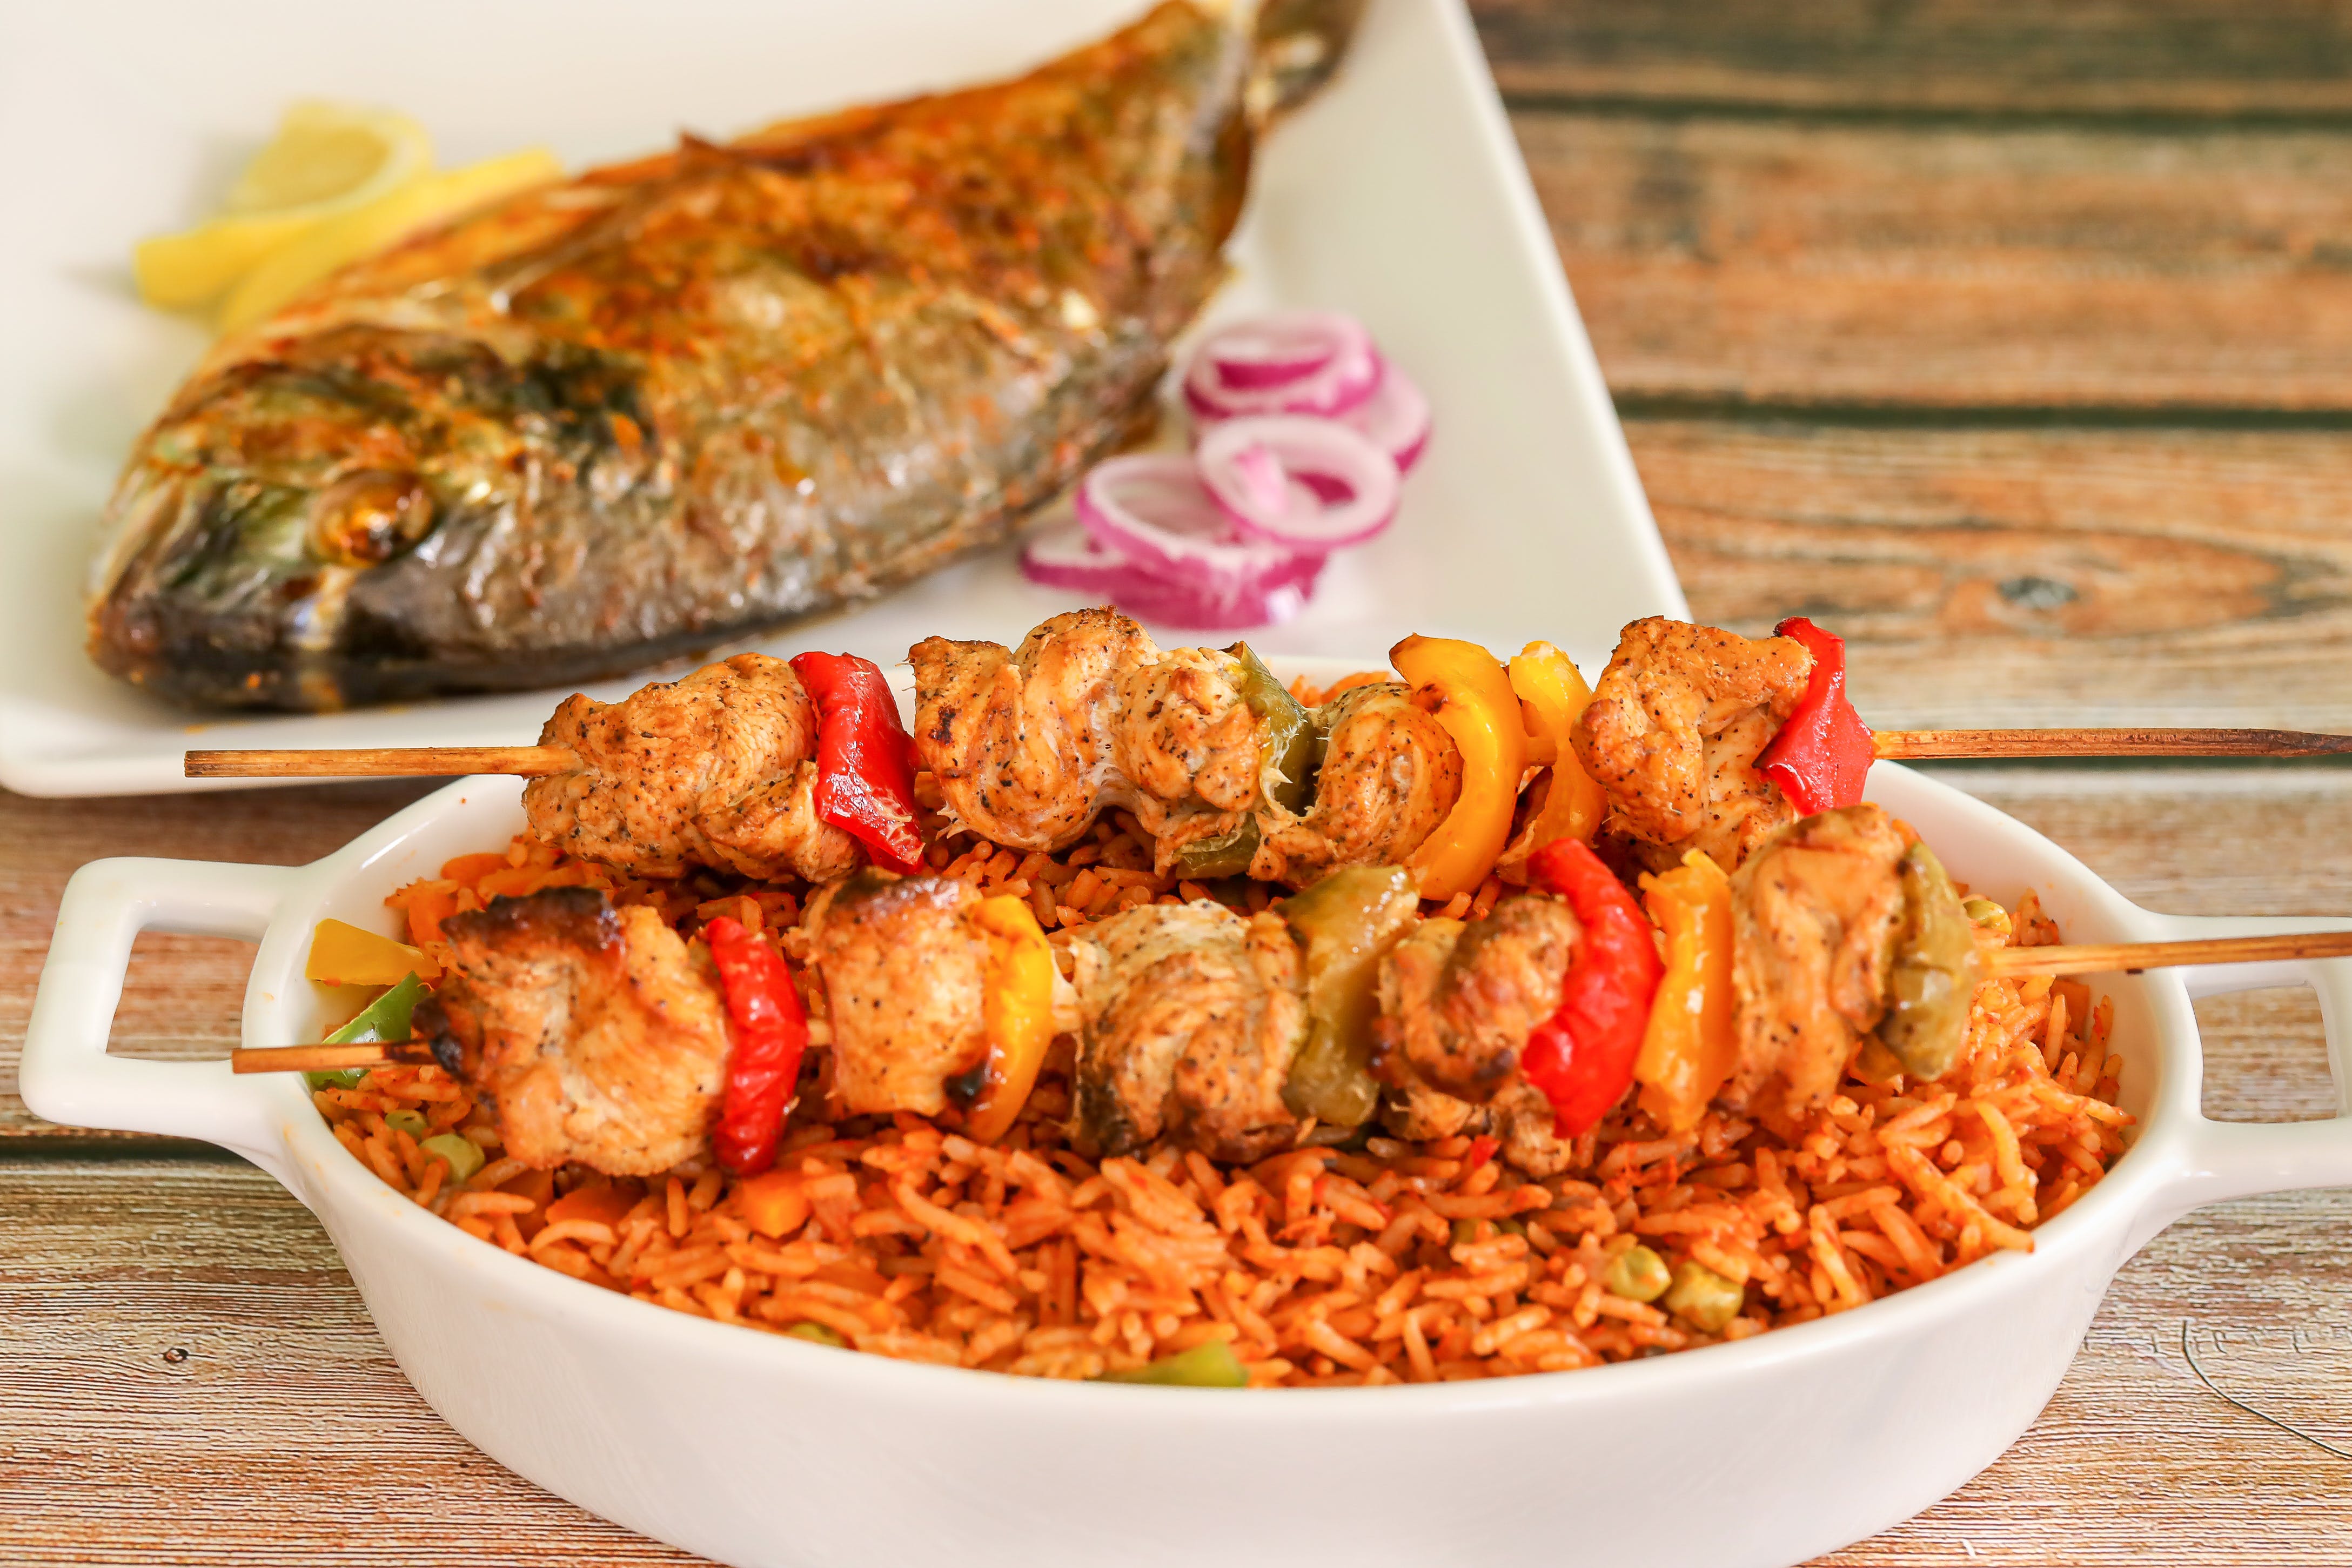 Jollof rice and grilled chicken skewers